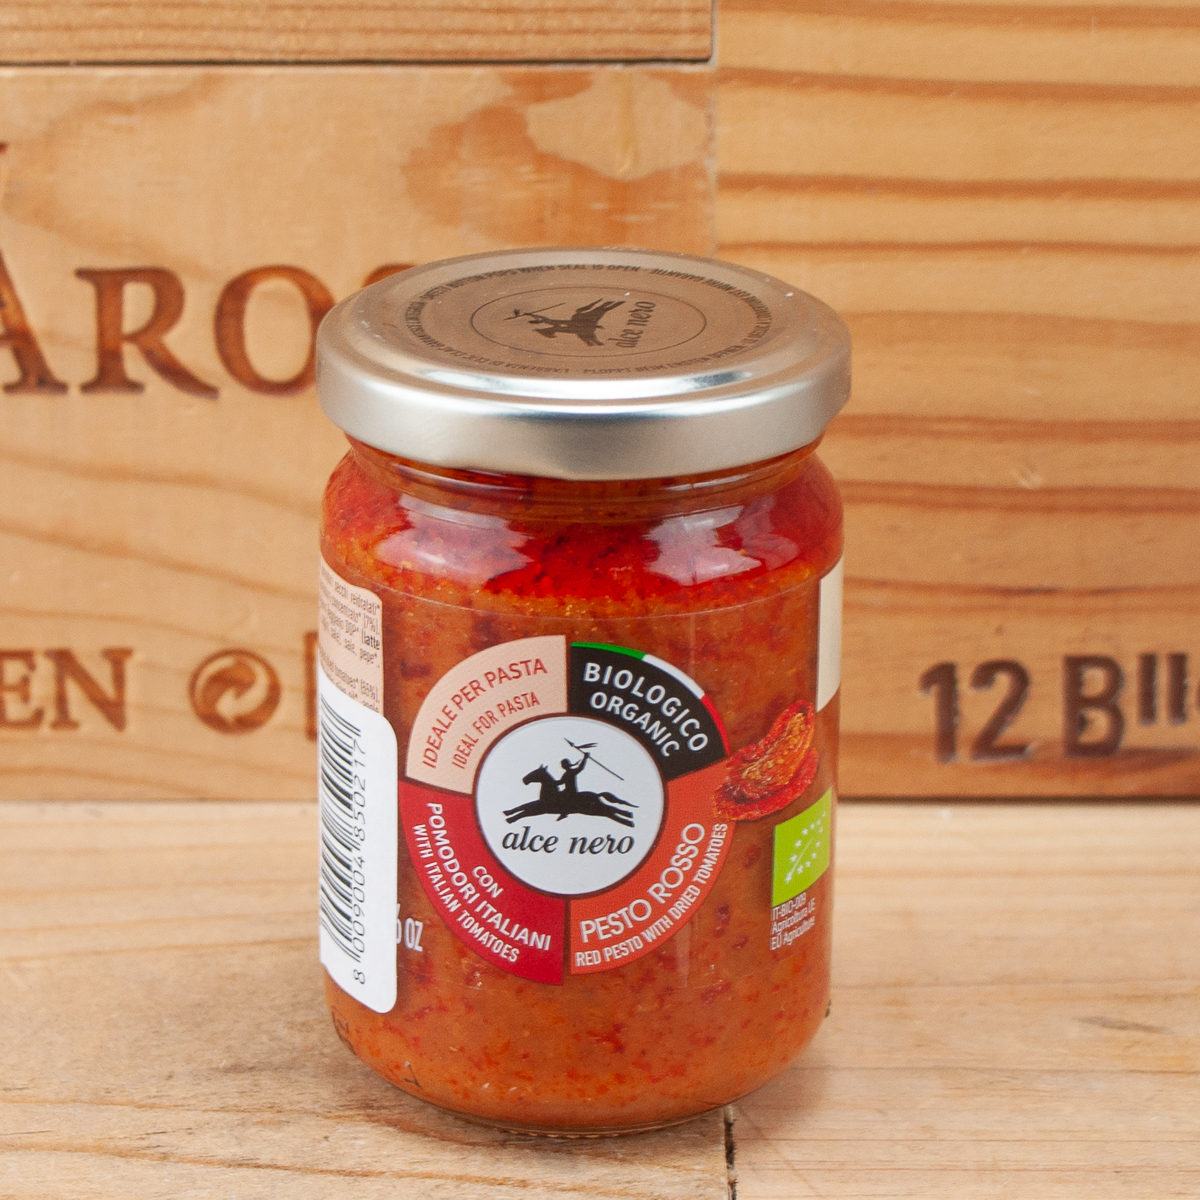 Organic red pesto with sun-dried tomatoes